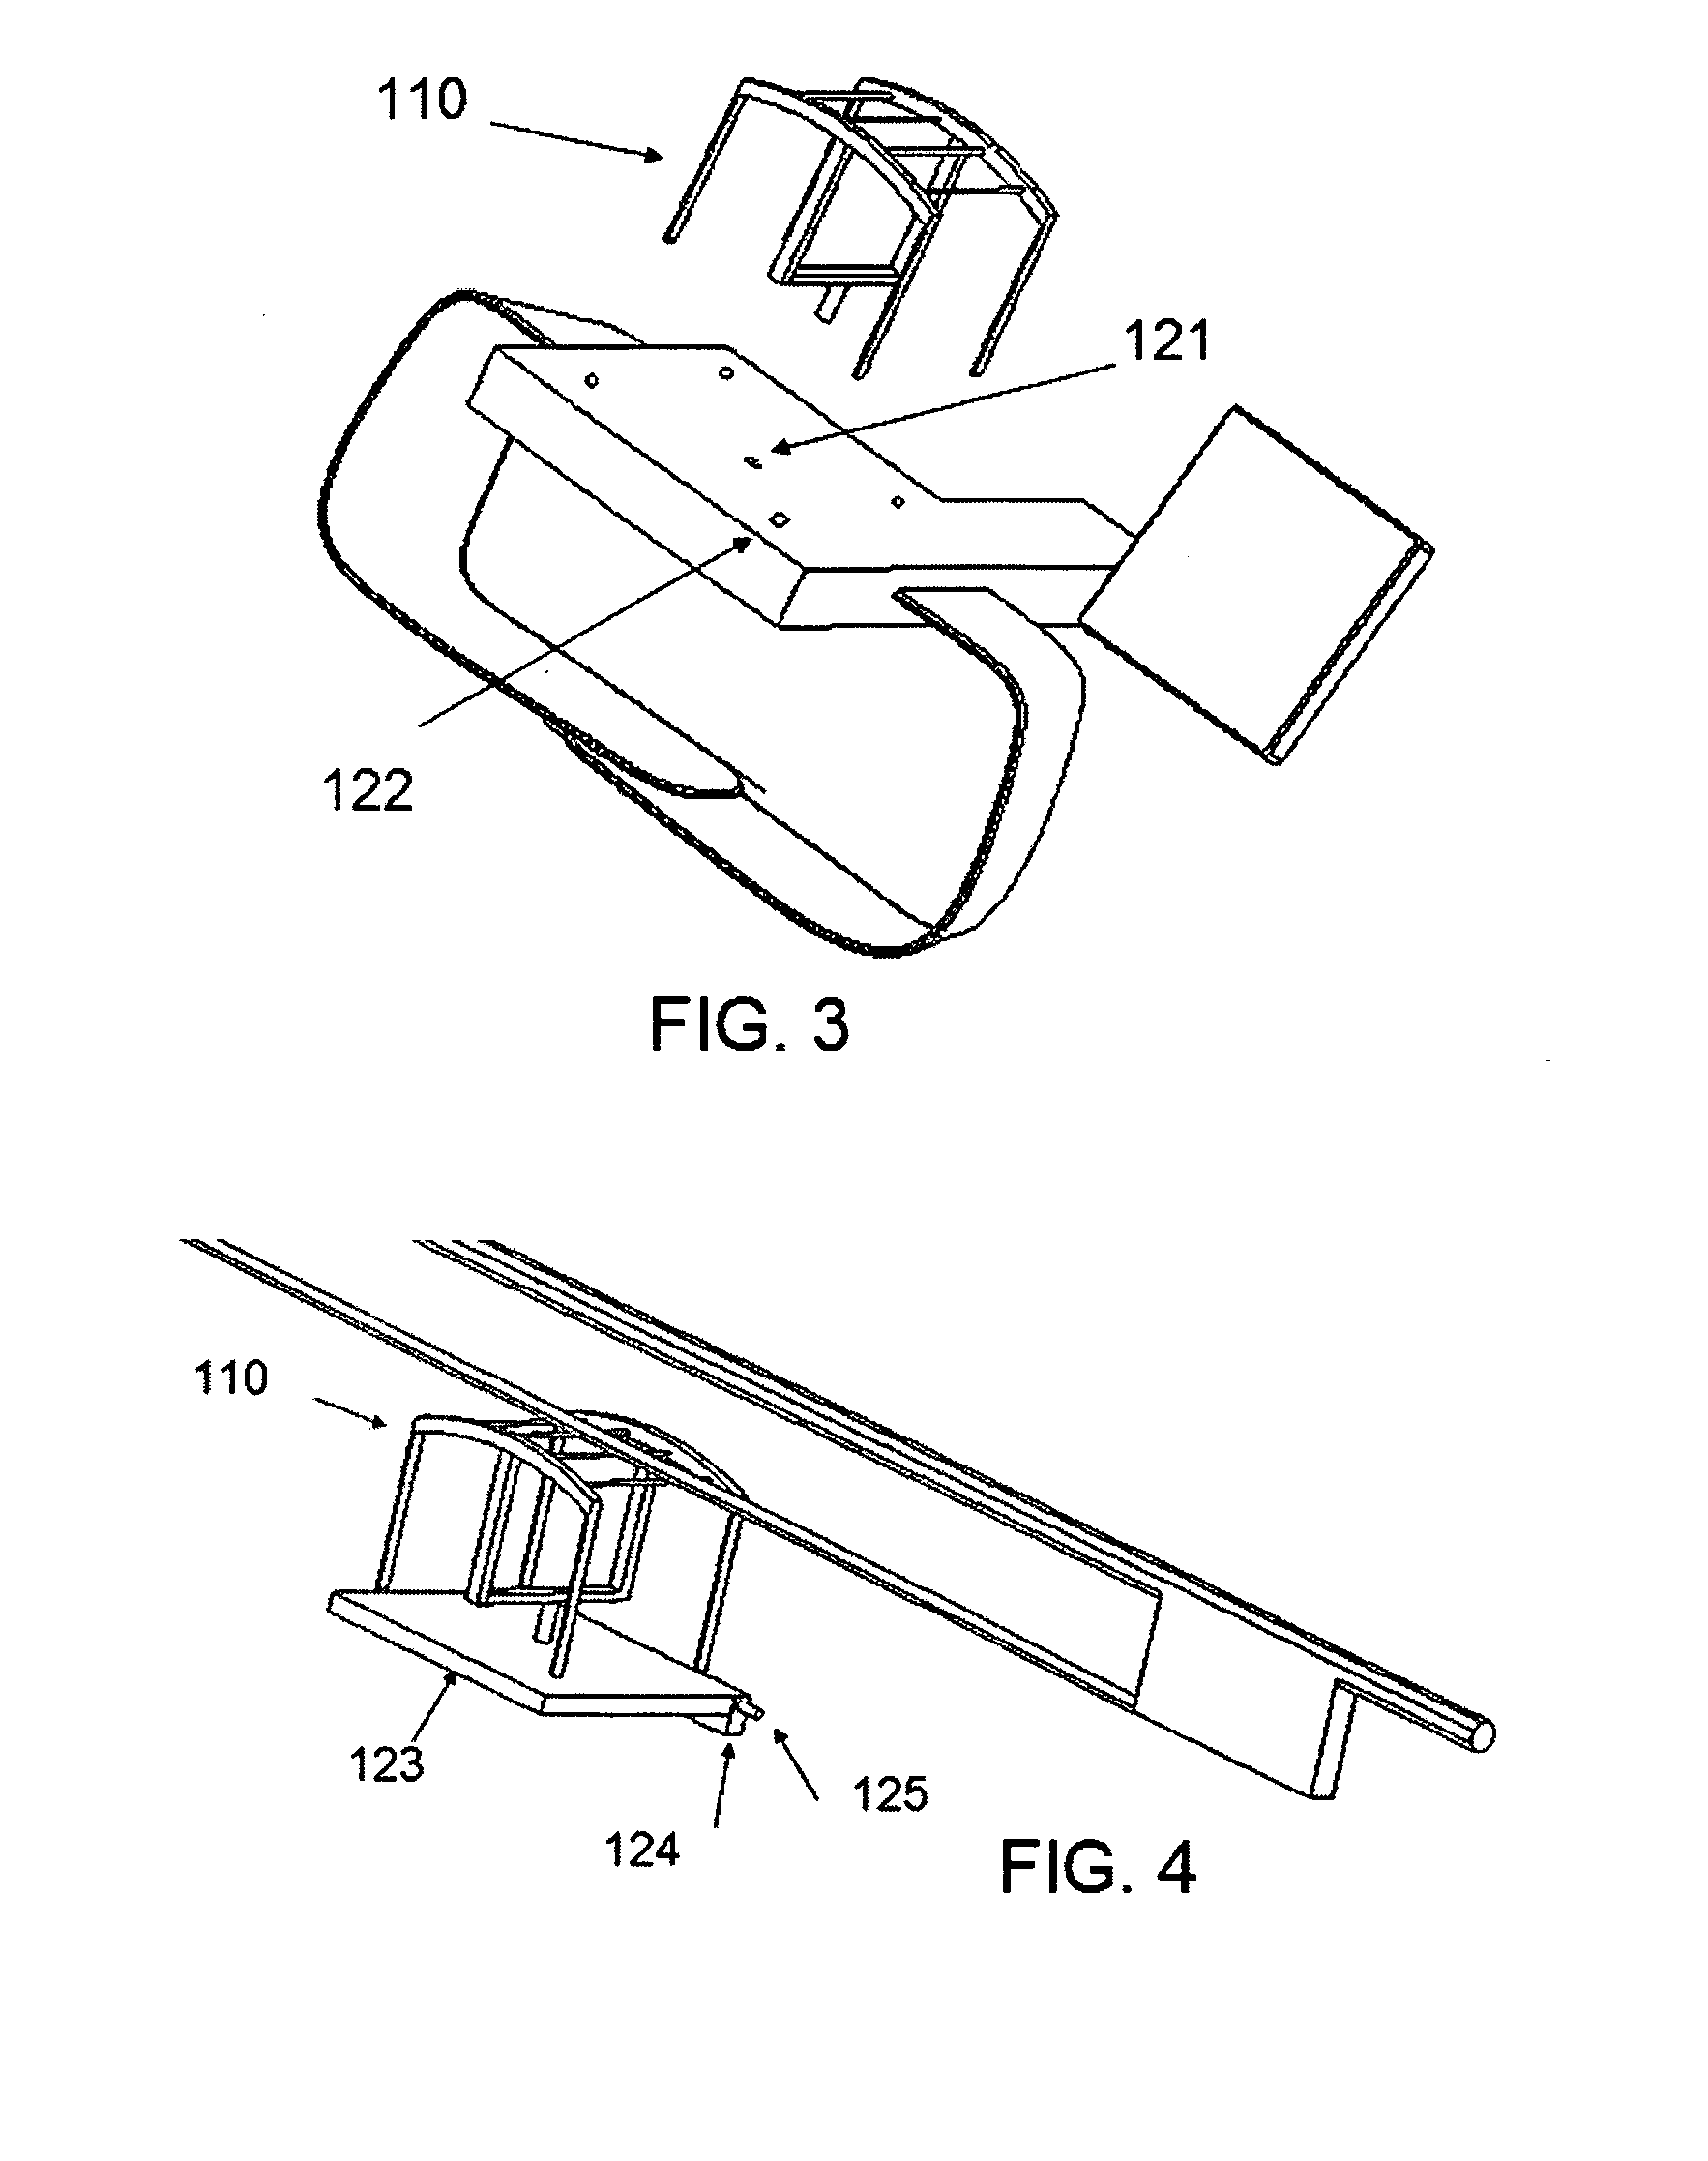 Bow-to-string pressure training device for bowed string music instruments